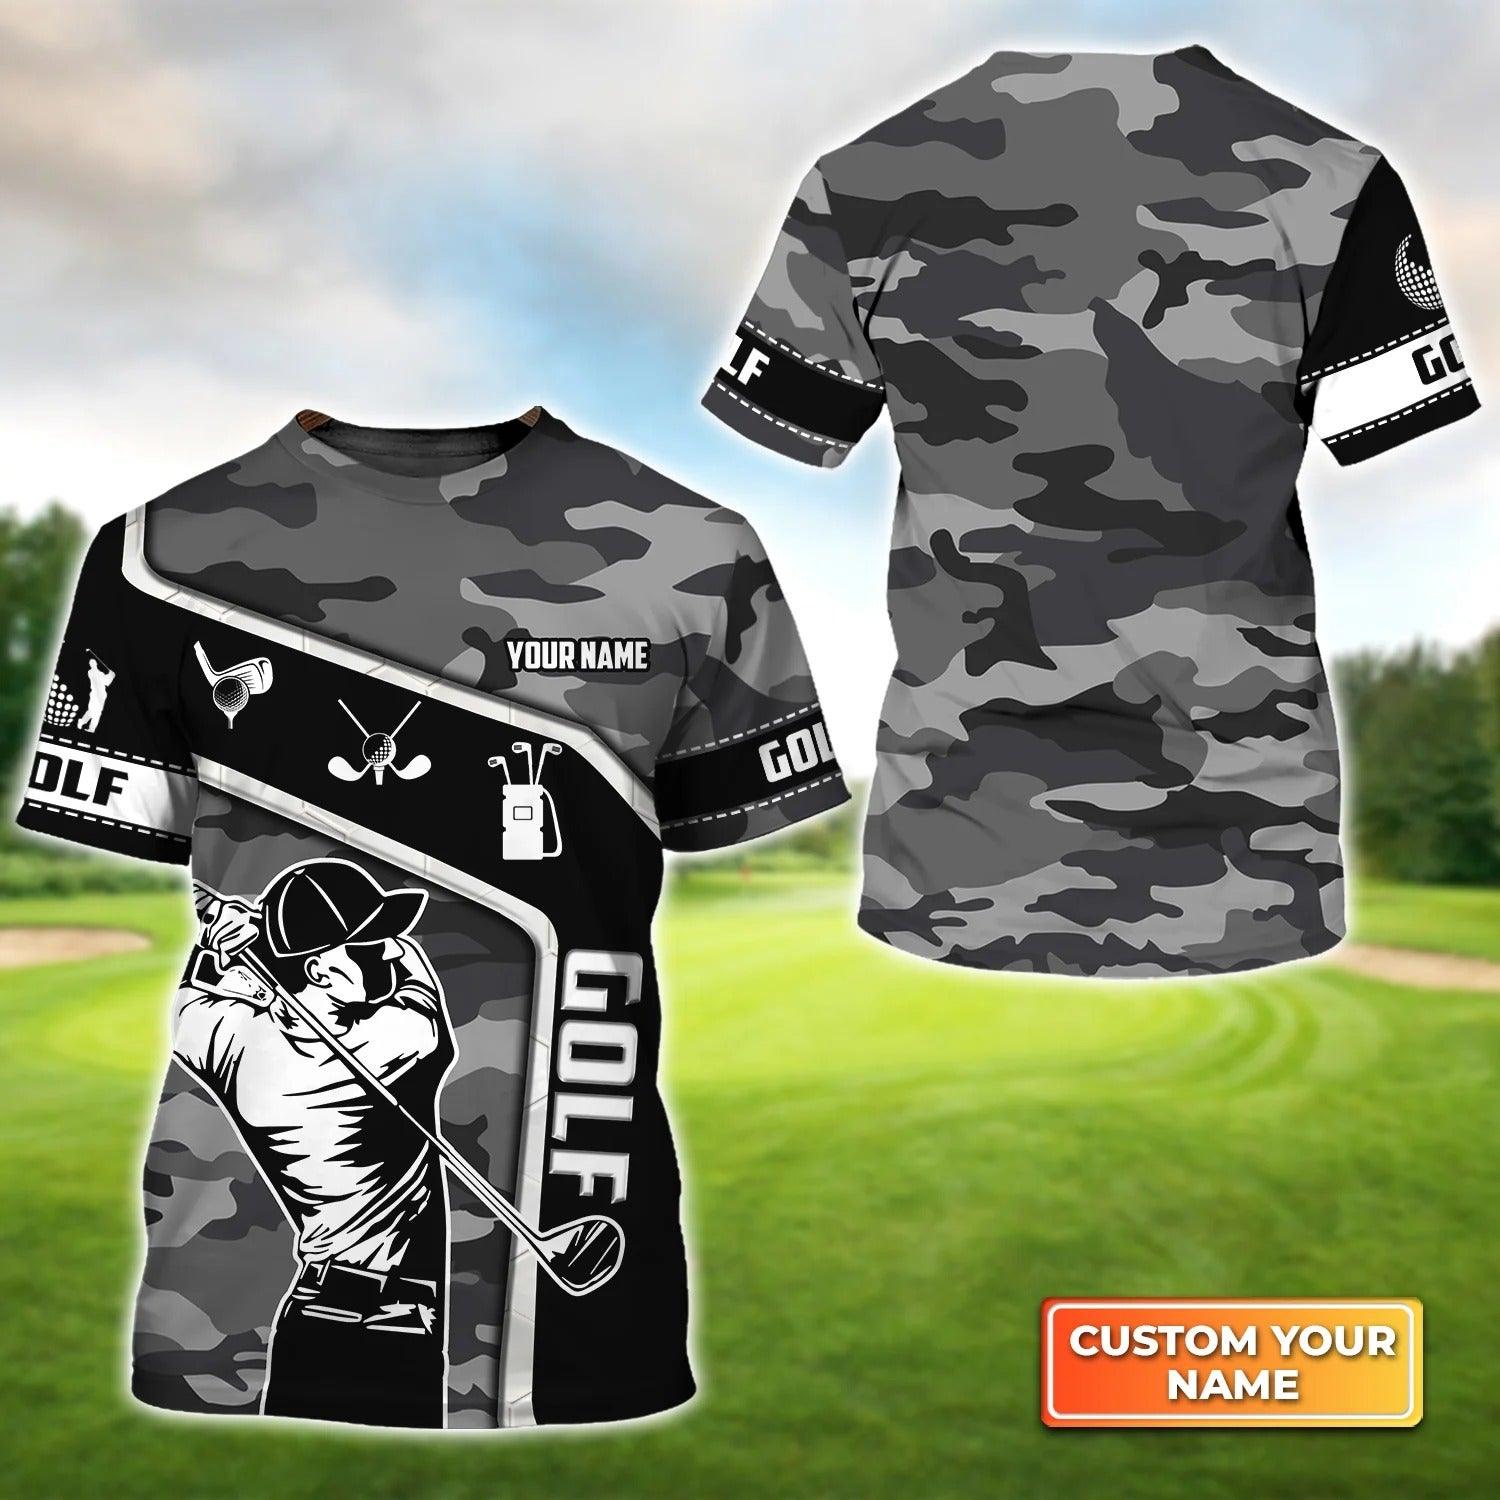 Customized Golf T Shirt, Personalized Name Golfer Graphic Golf Camo Pattern T Shirt For Golf Lovers - Perfect Gift For Golfer, Friend, Family - Amzanimalsgift